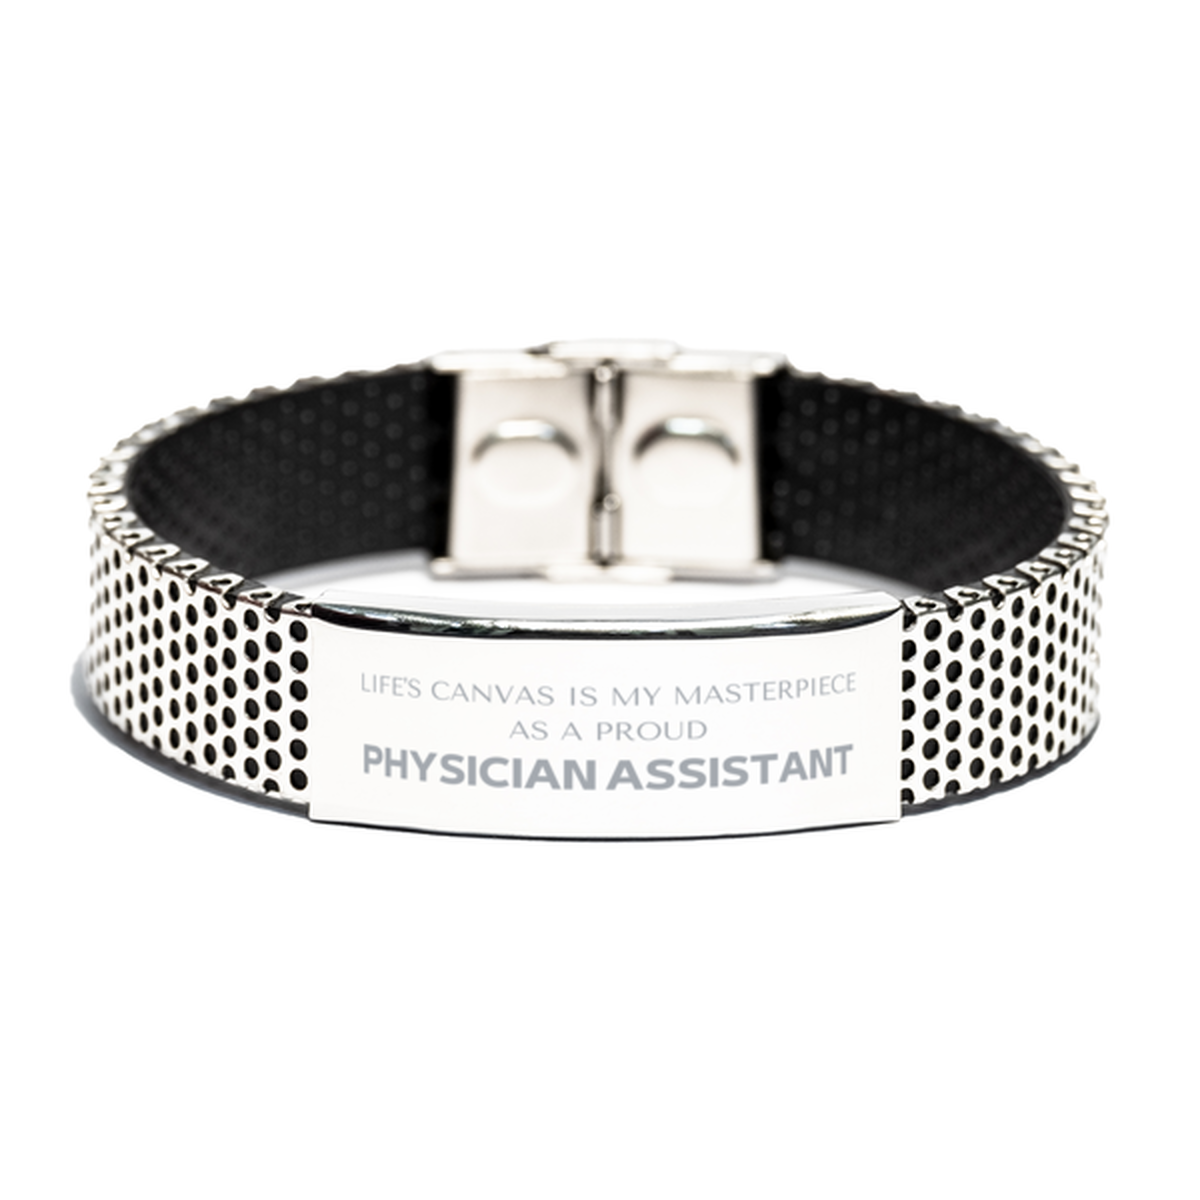 Proud Physician Assistant Gifts, Life's canvas is my masterpiece, Epic Birthday Christmas Unique Stainless Steel Bracelet For Physician Assistant, Coworkers, Men, Women, Friends